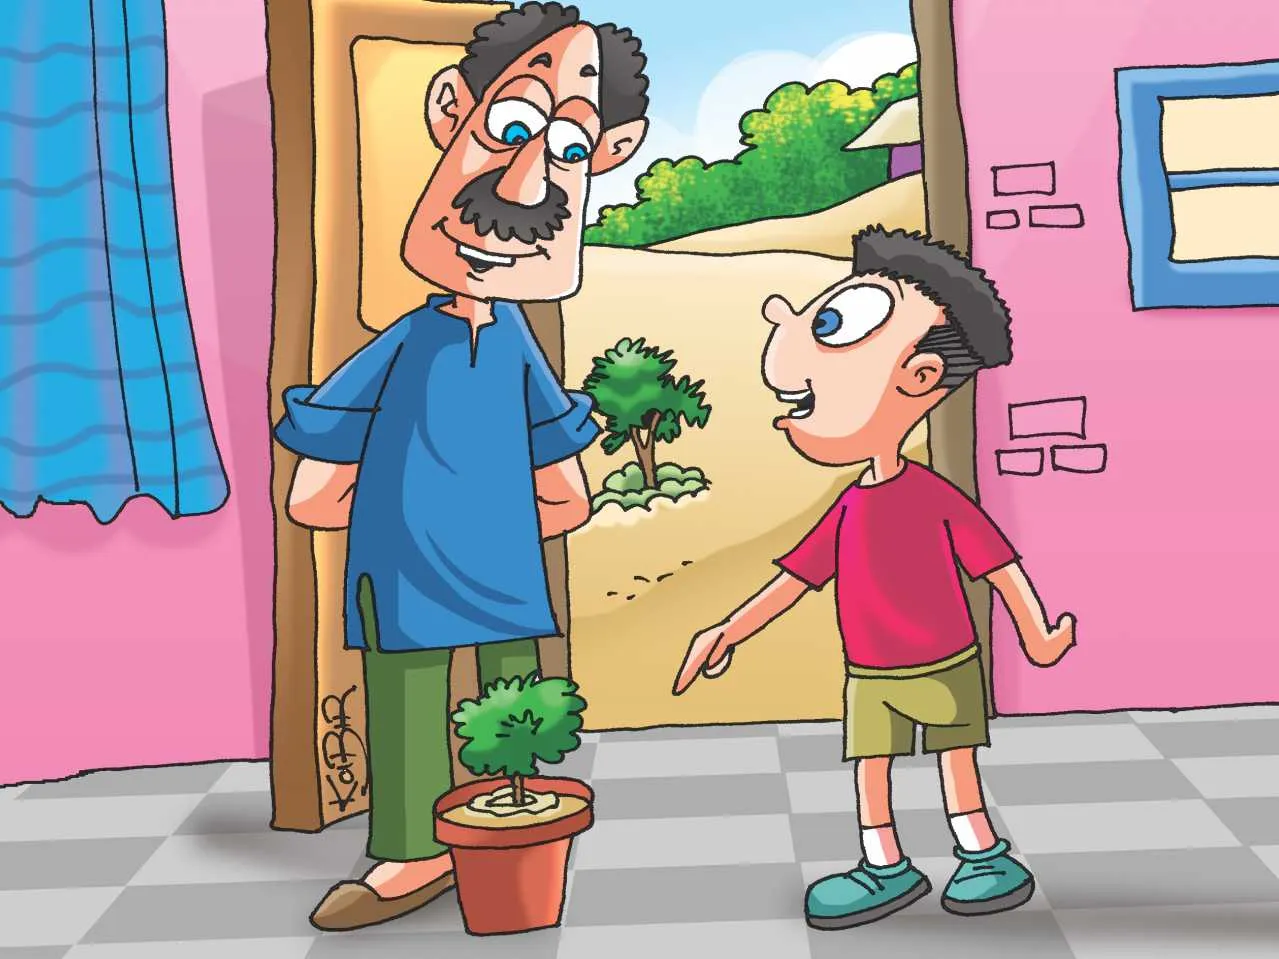 Boy with his grandfather cartoon image